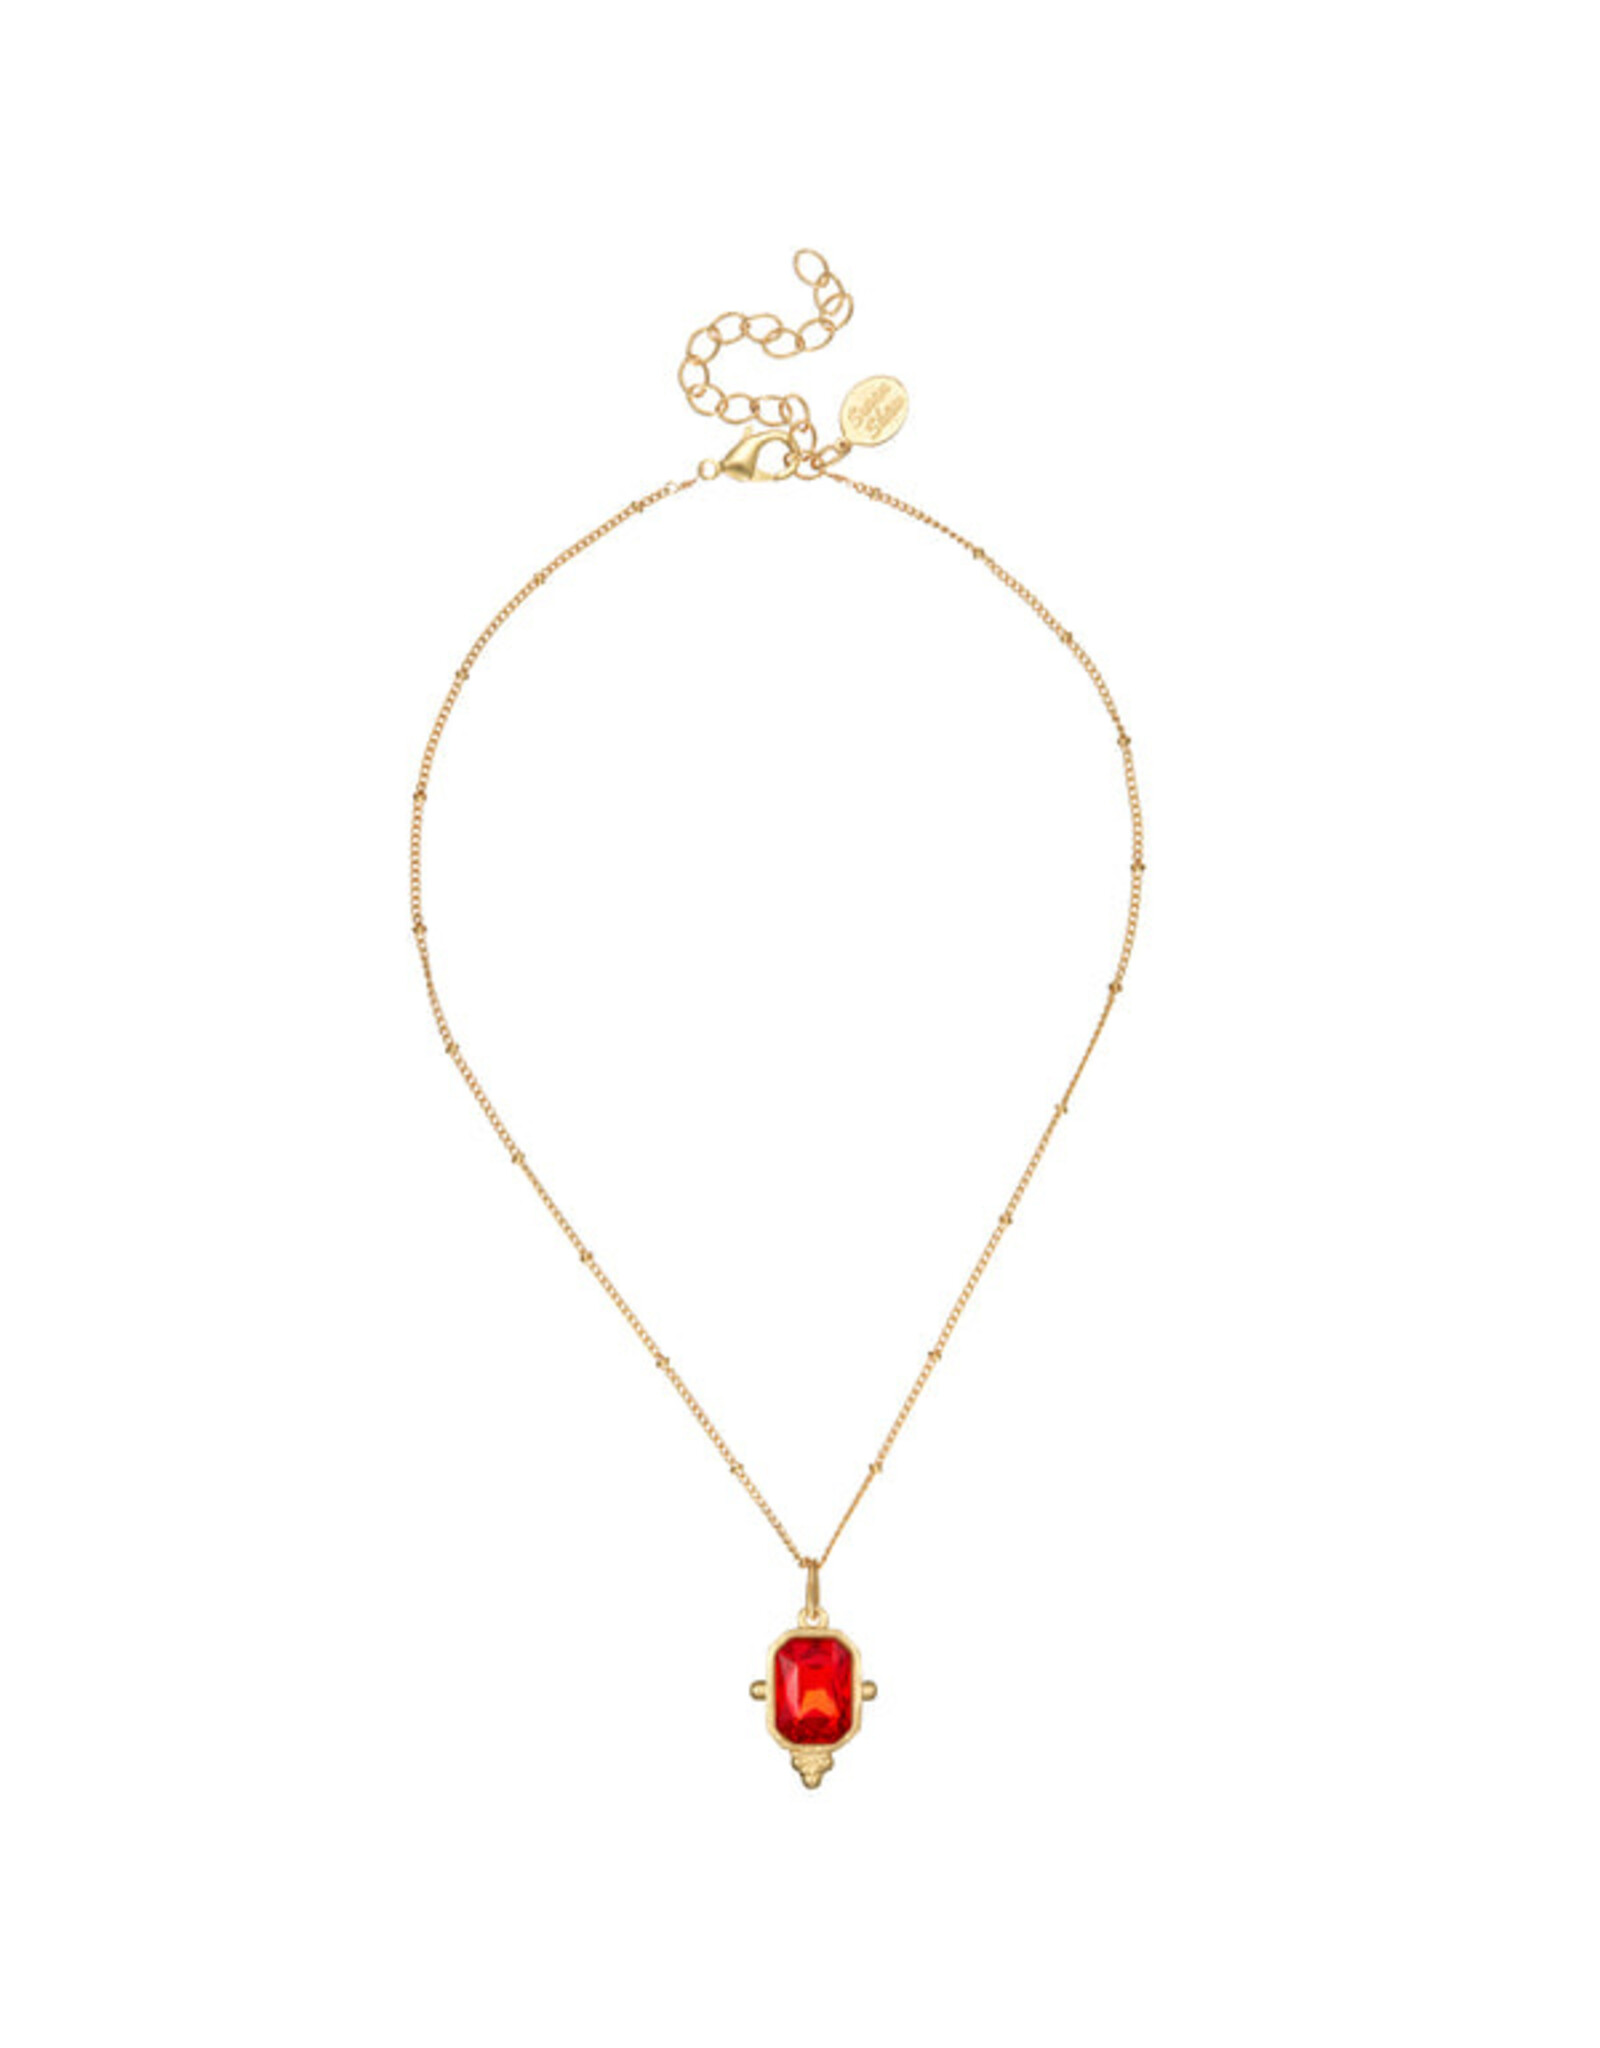 Susan Shaw Dainty Collins Necklace Ruby Red